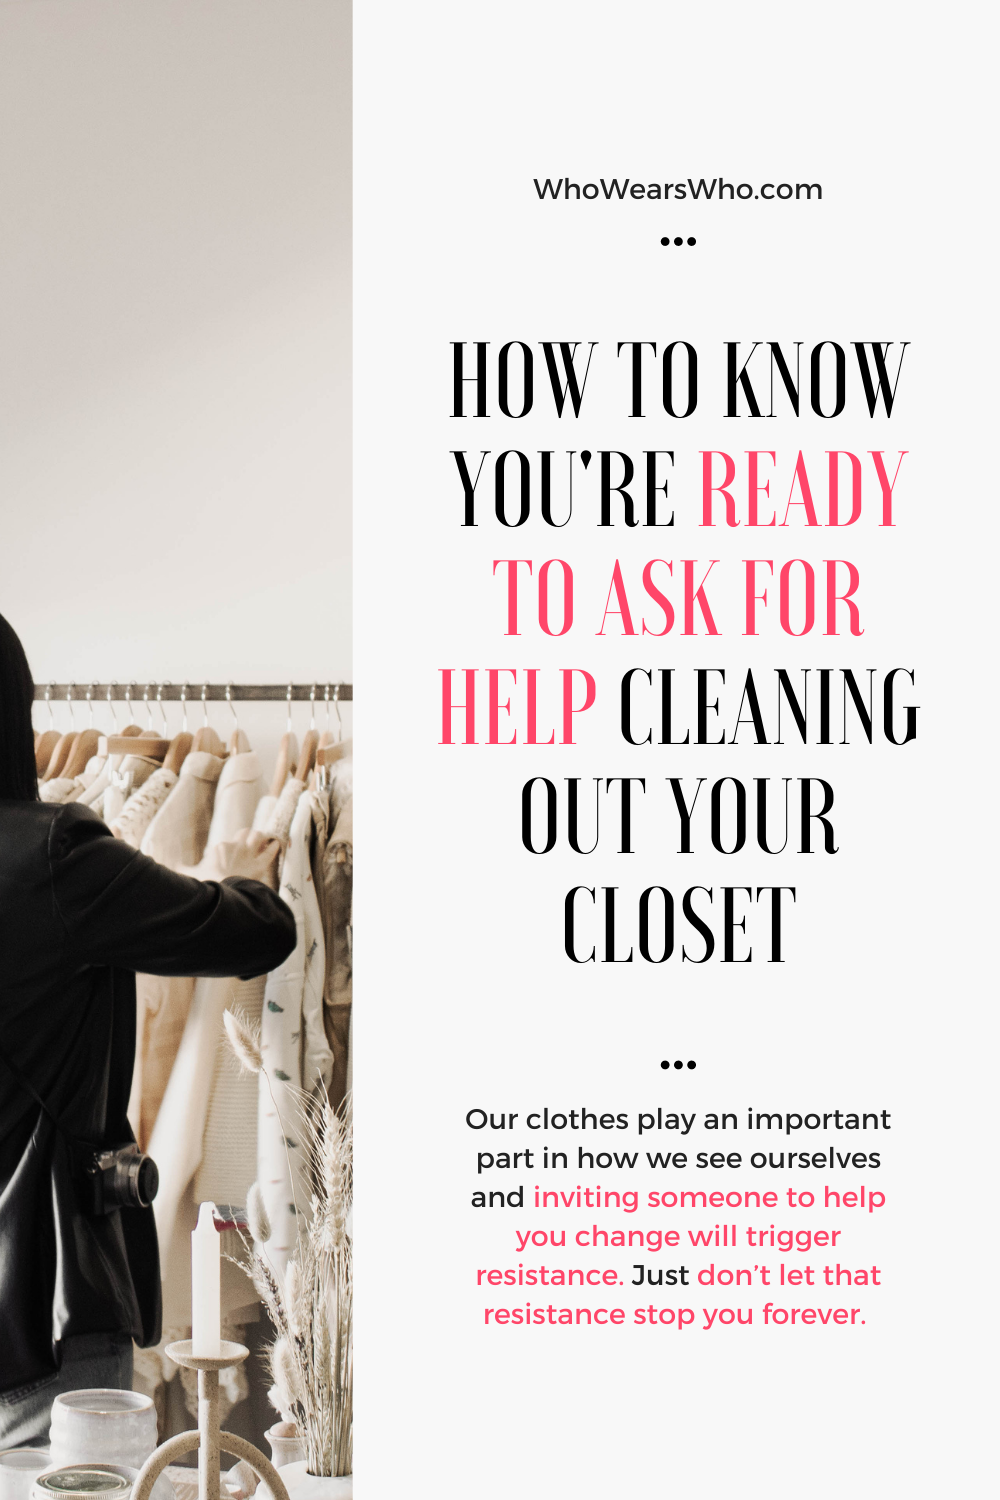 How to know you’re ready to ask for help cleaning out your closet